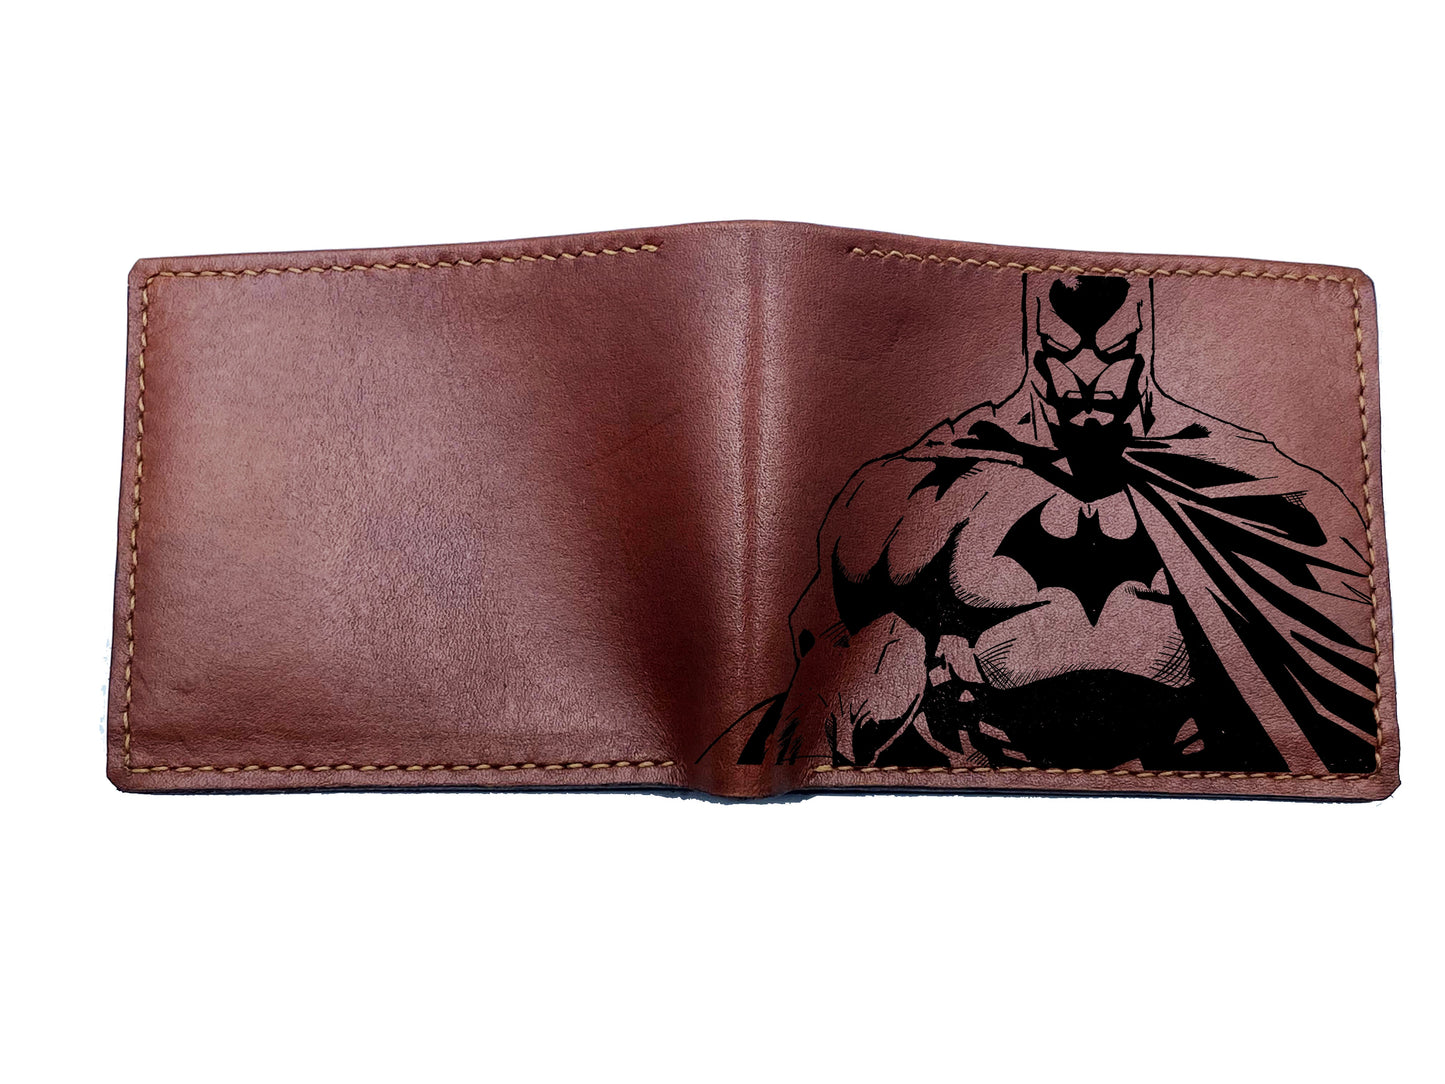 Mayan Corner - Personalized leather handmade wallet, superheroes leather gift for him, batman leather wallet, batman gift for dad, cool leather anniversary present